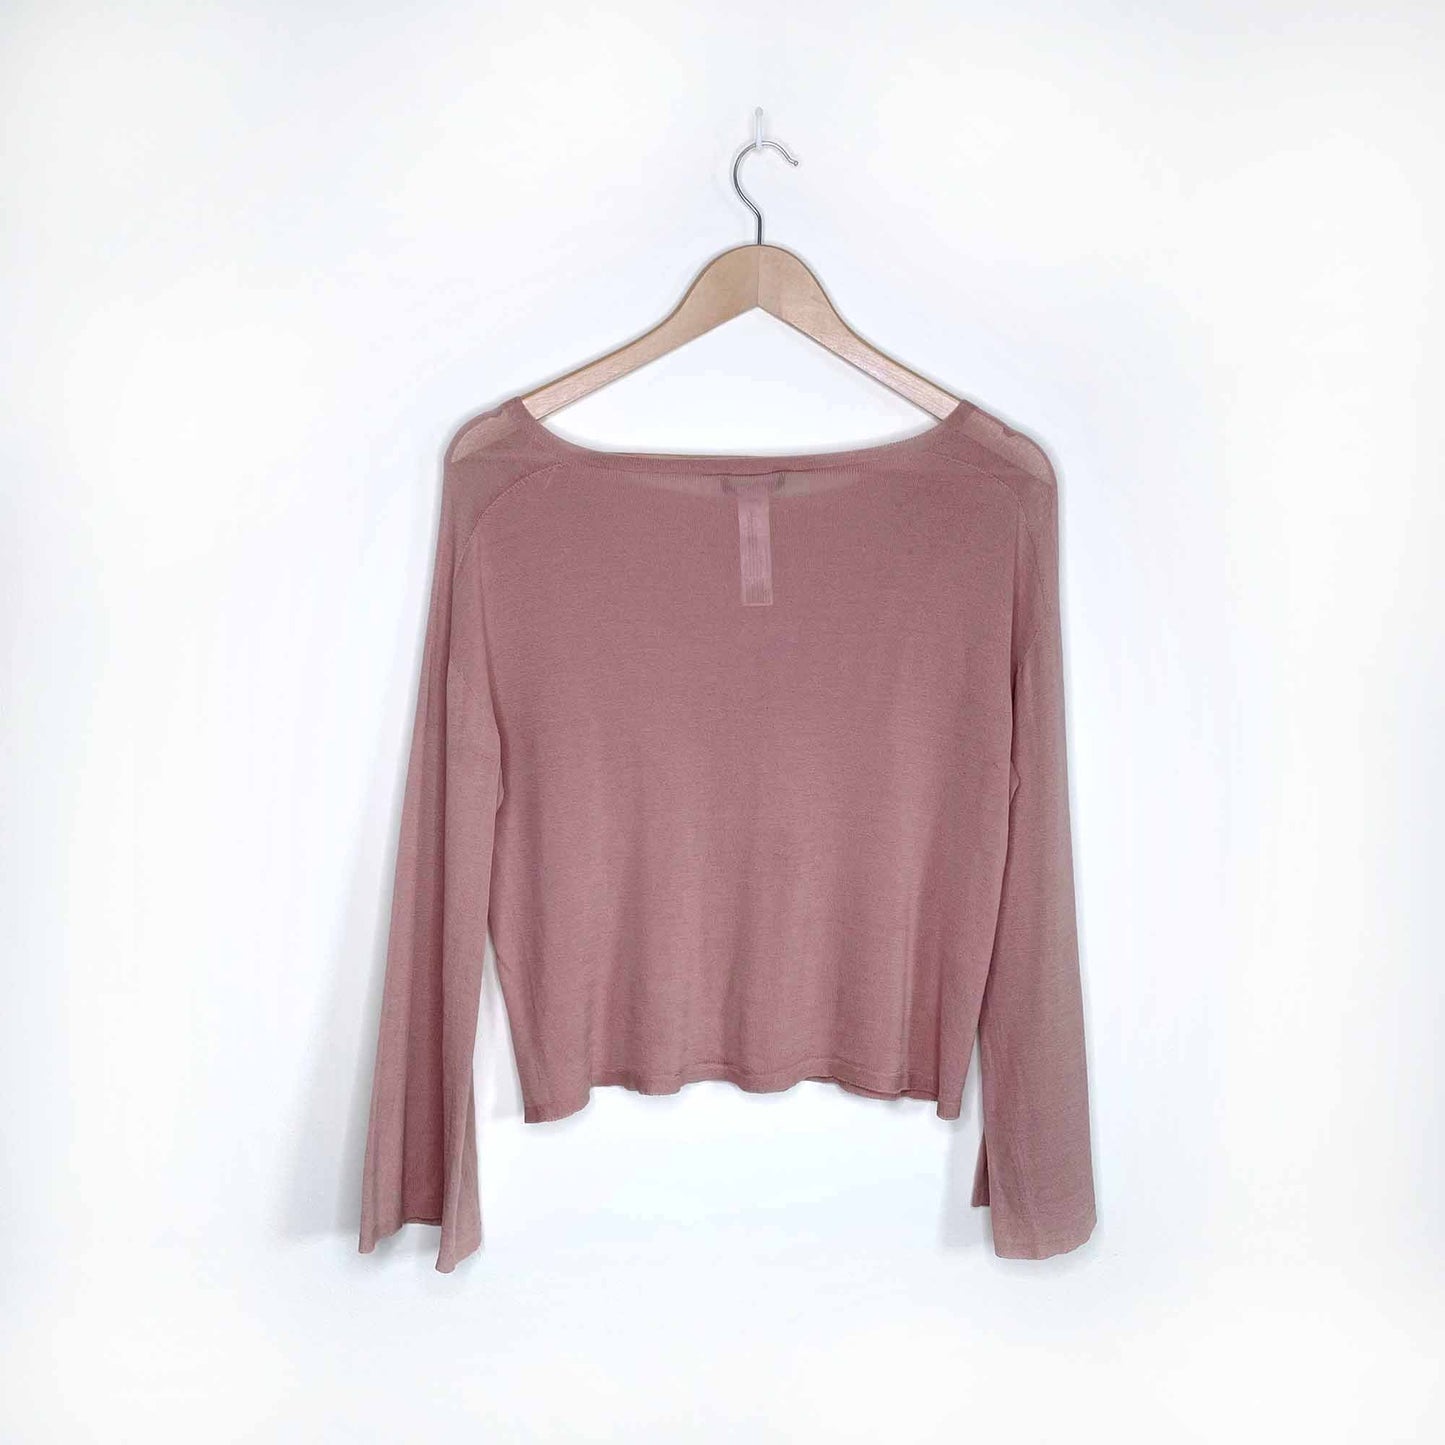 eileen fisher lightweight tencel knit sweater with bell sleeves - size xs